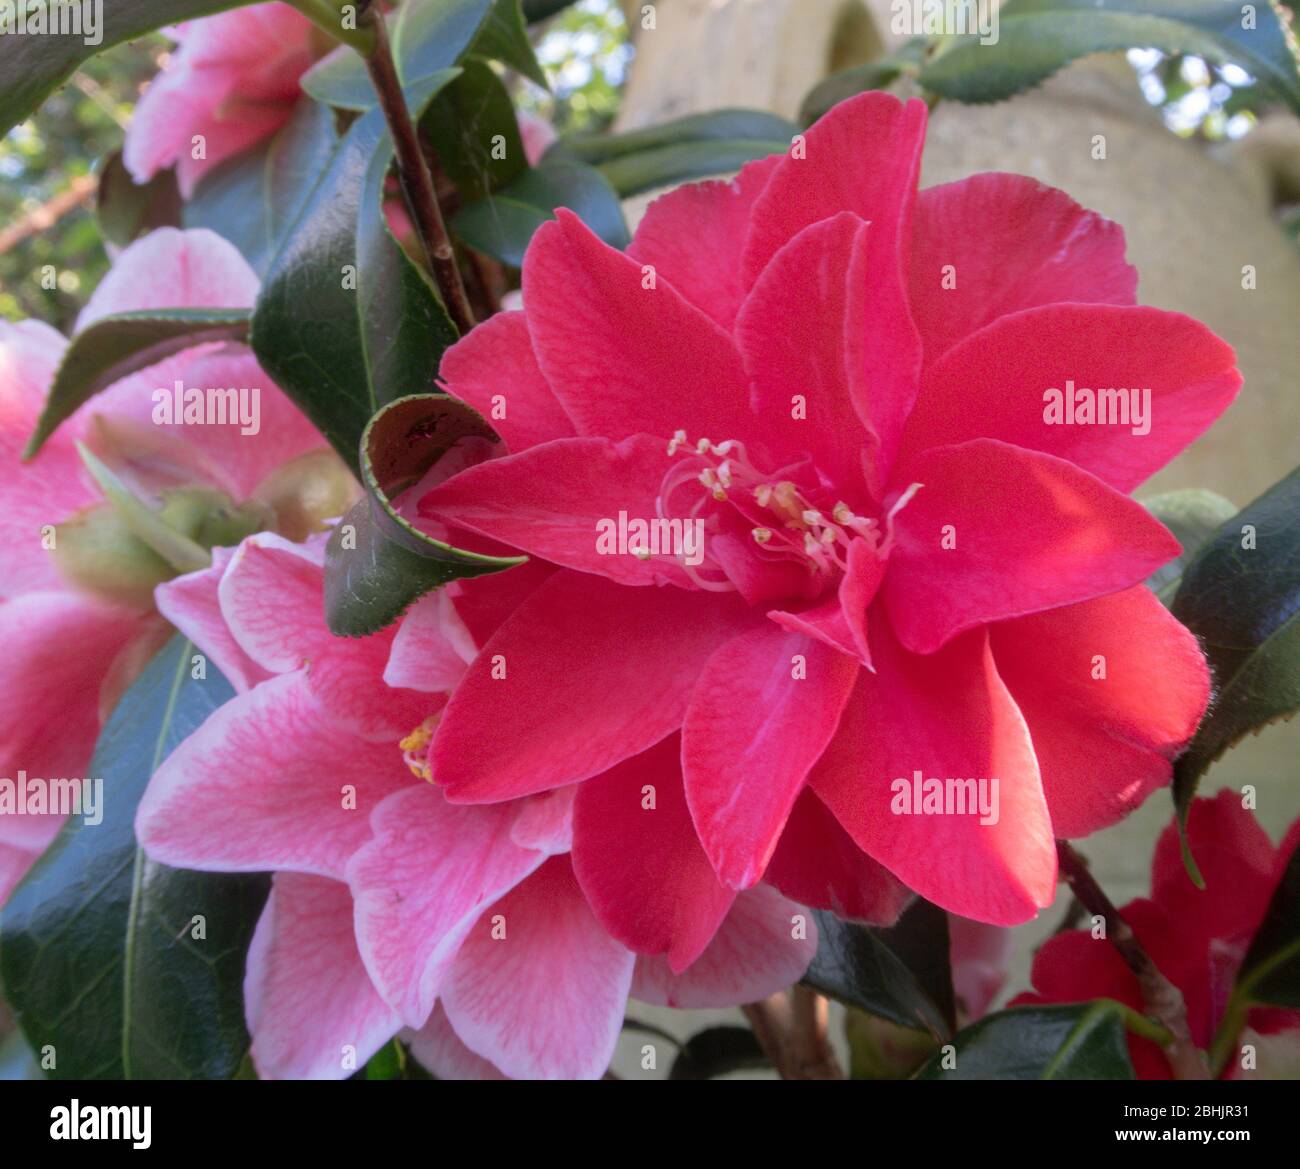 Camellia Japonica Lady Vansittart in flower, April 2020, Devon, UK, flowers turning from pale to a darker pink. Stock Photo